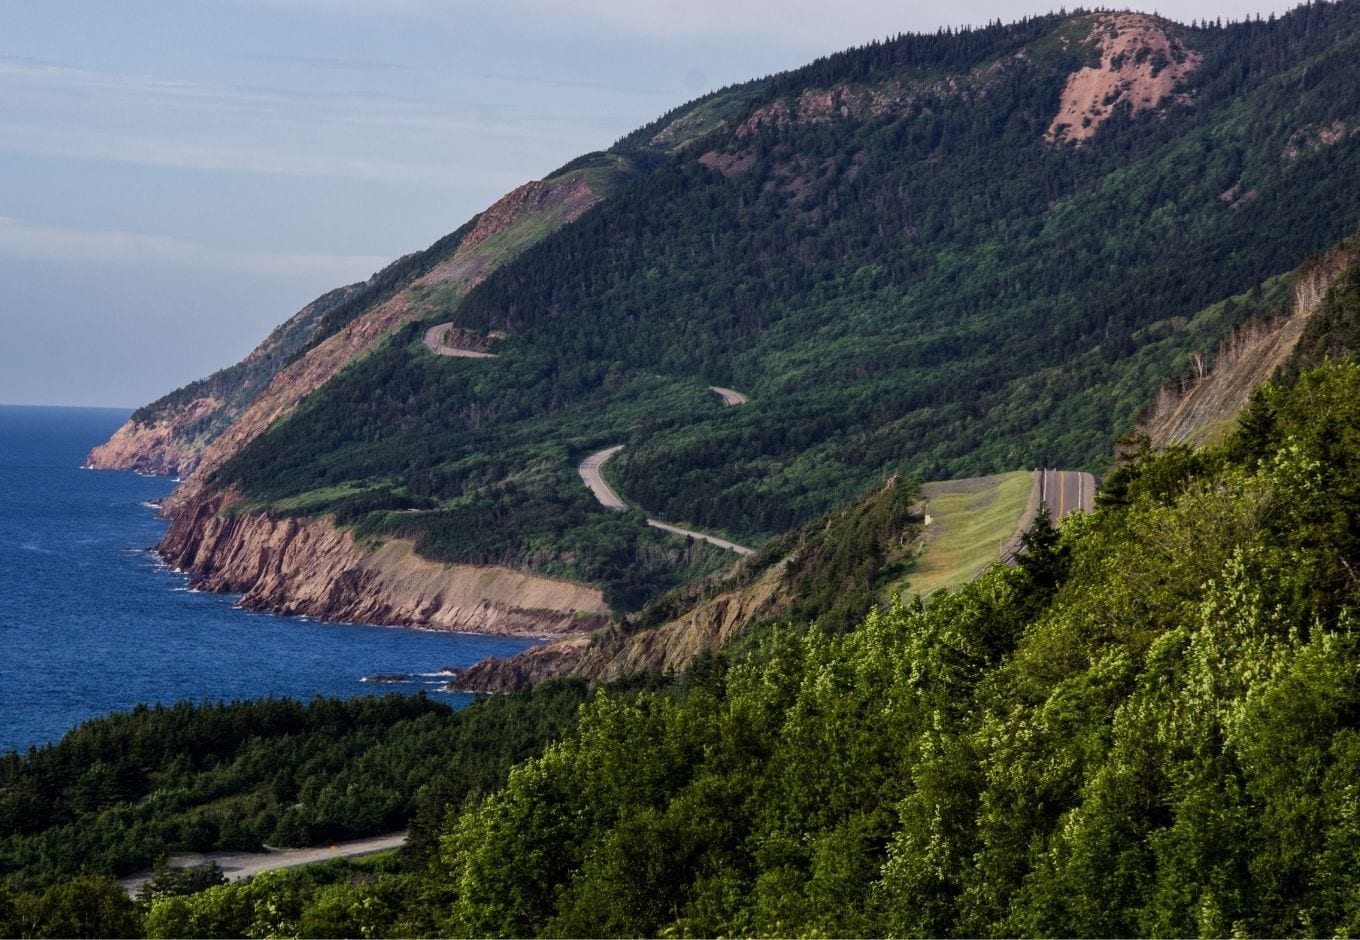 The Cabot Trail Road surrounded by green forests, at Nova Scotia.